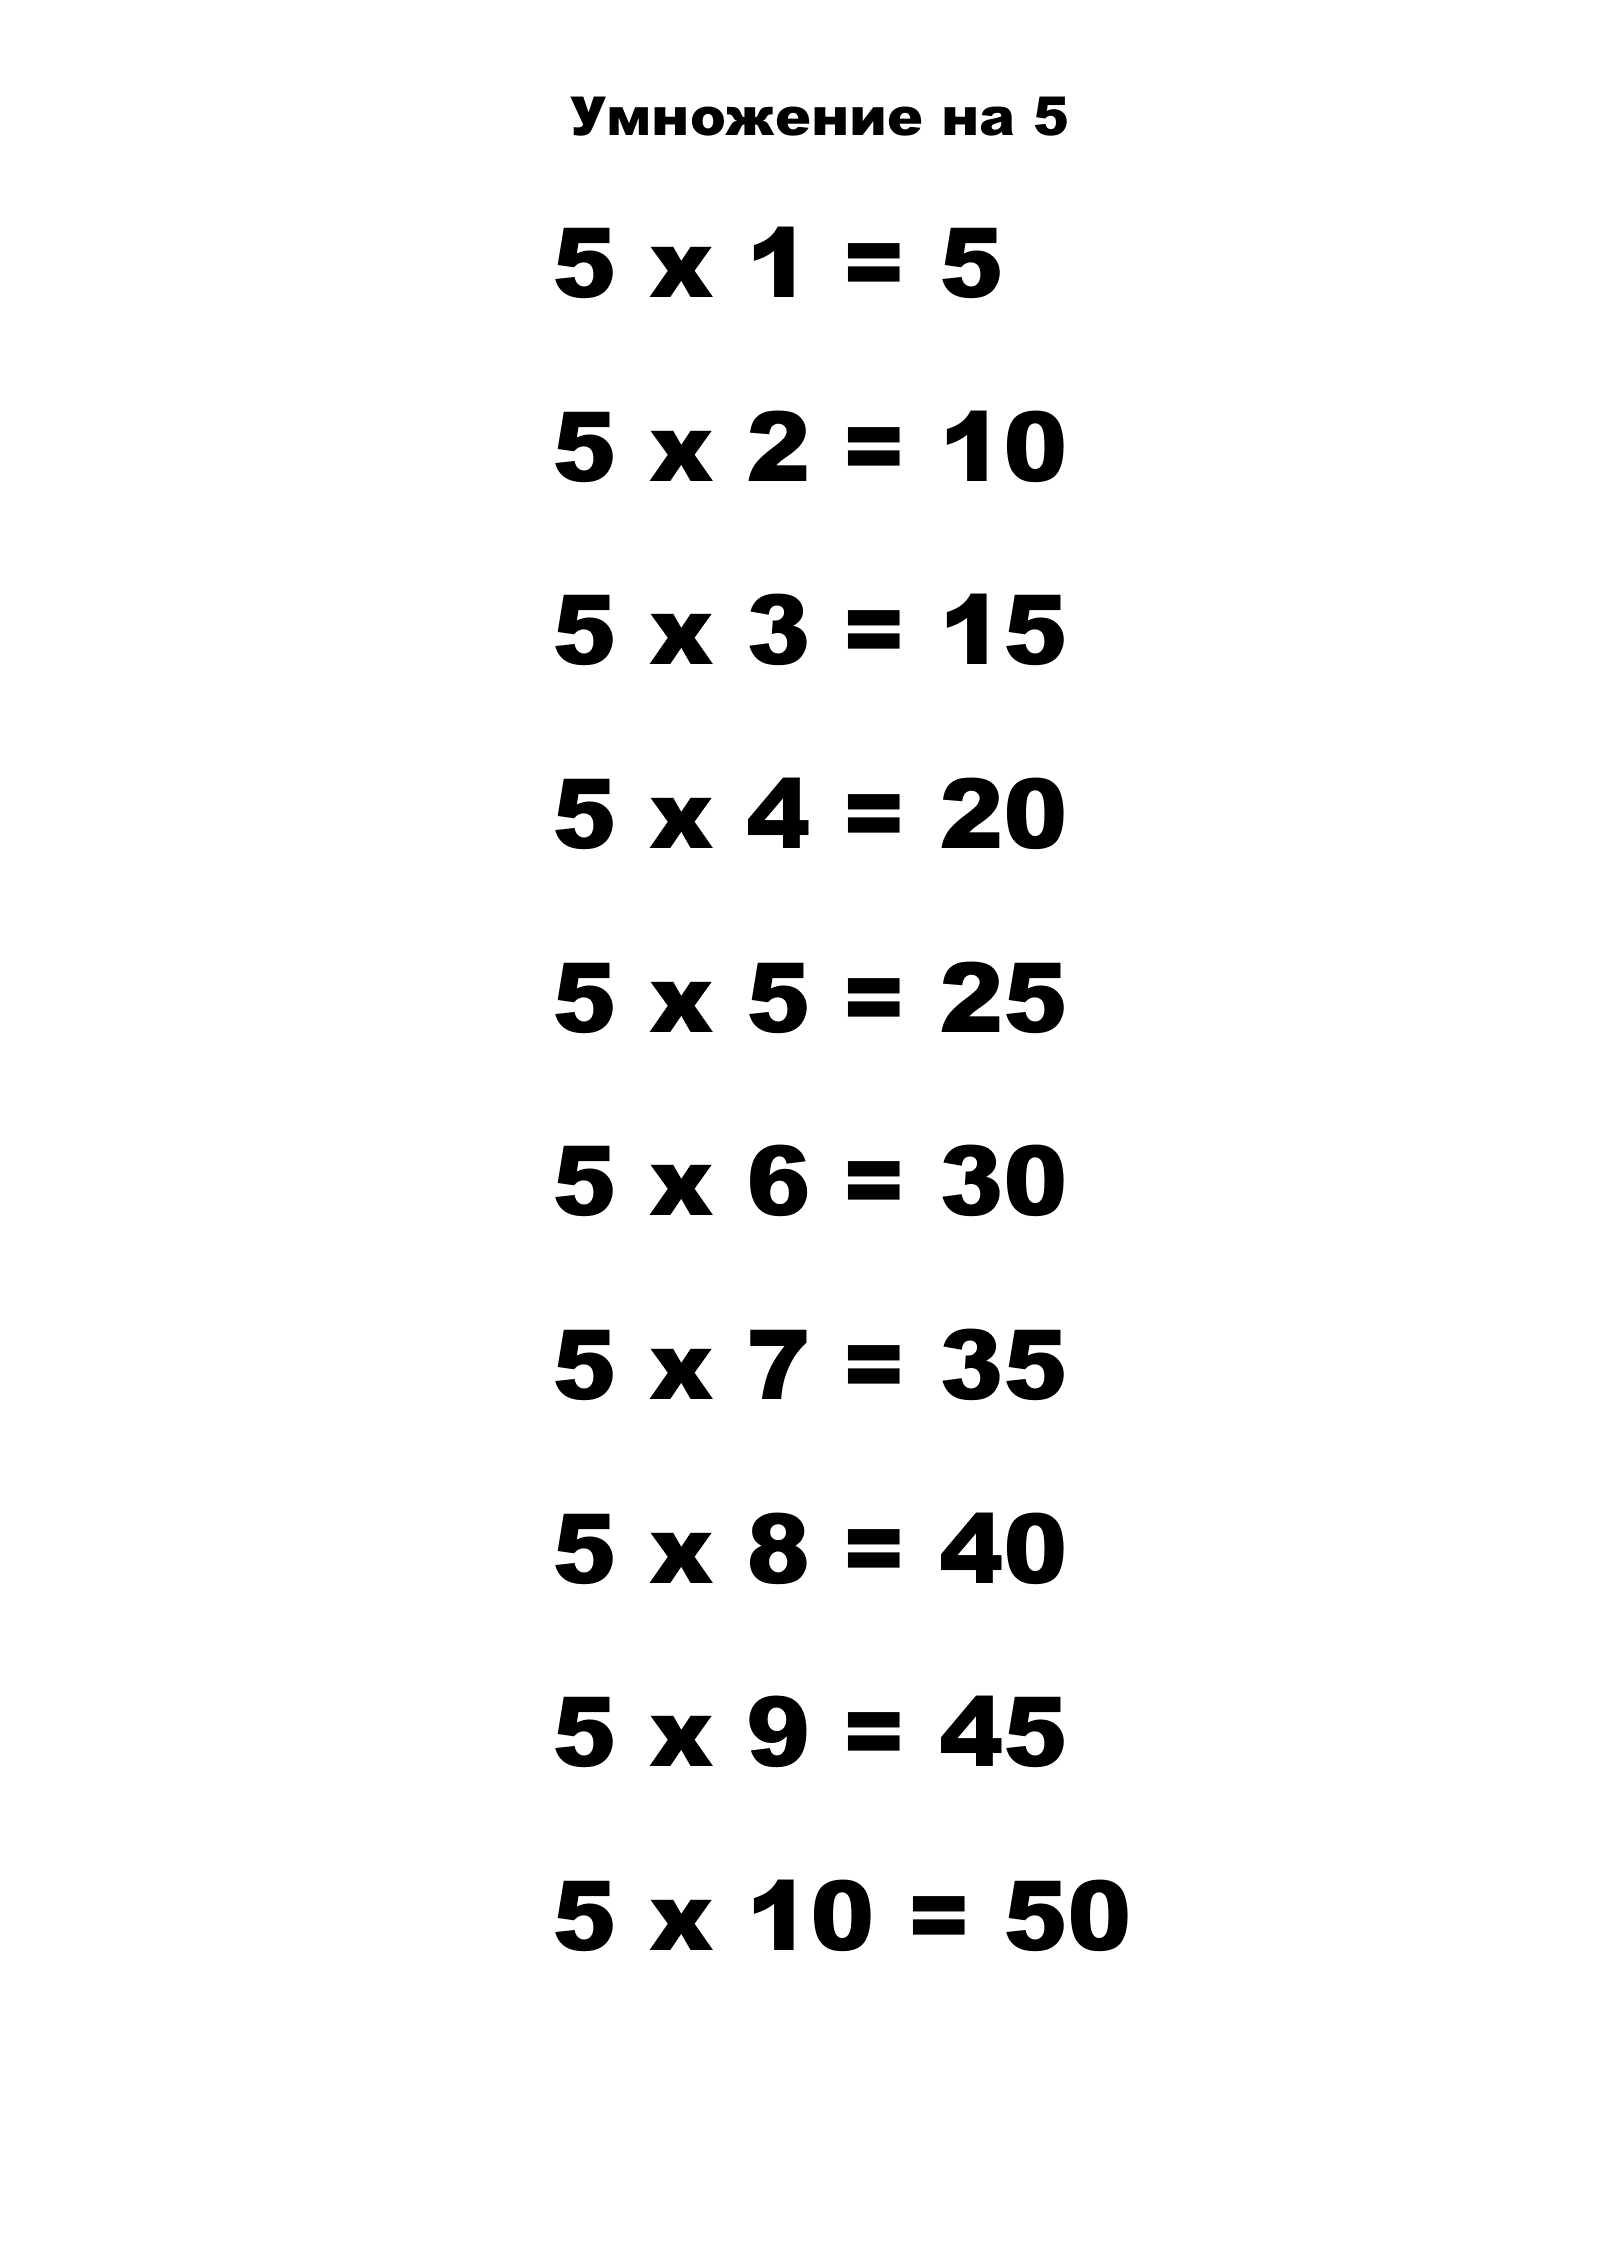 Multiplication Table for 5.